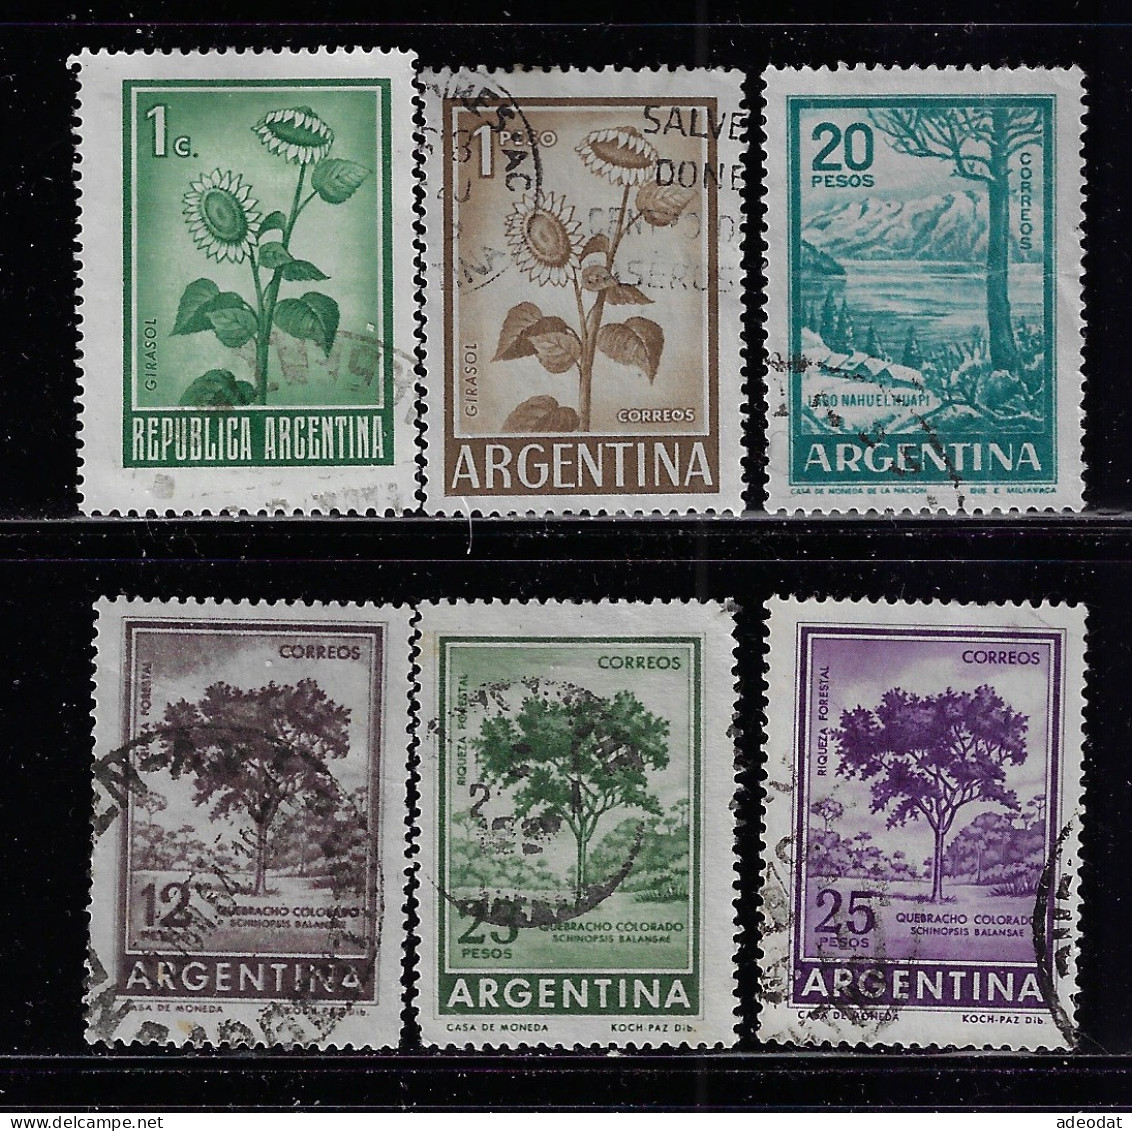 ARGENTINA 1960-1966   SCOTT #690,697,698,702,703  USED - Used Stamps